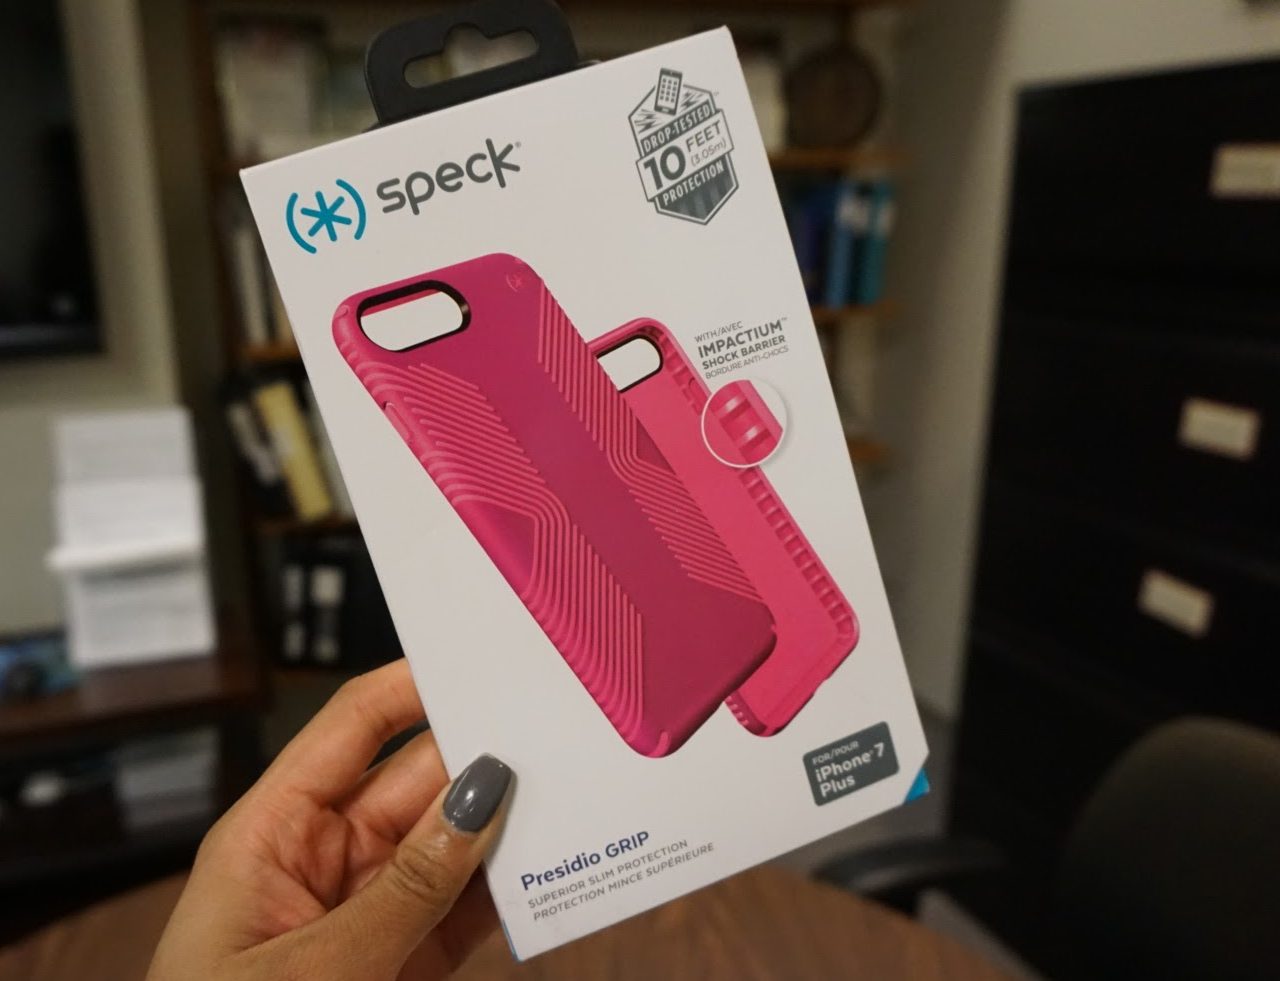 red iphone 6 case speck